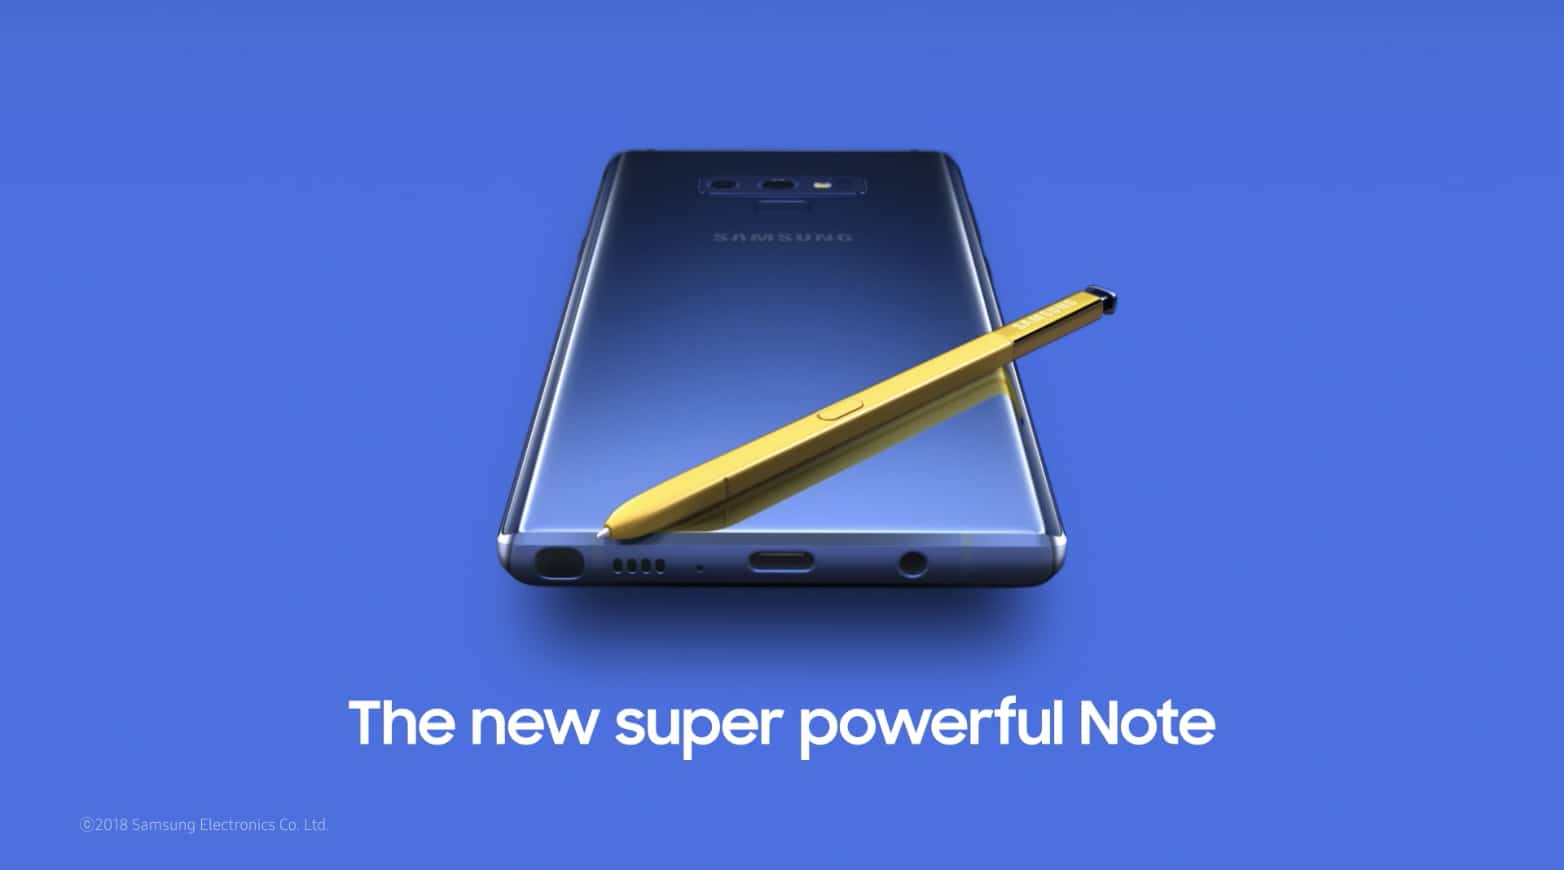 Samsung leaks Galaxy Note 9 early